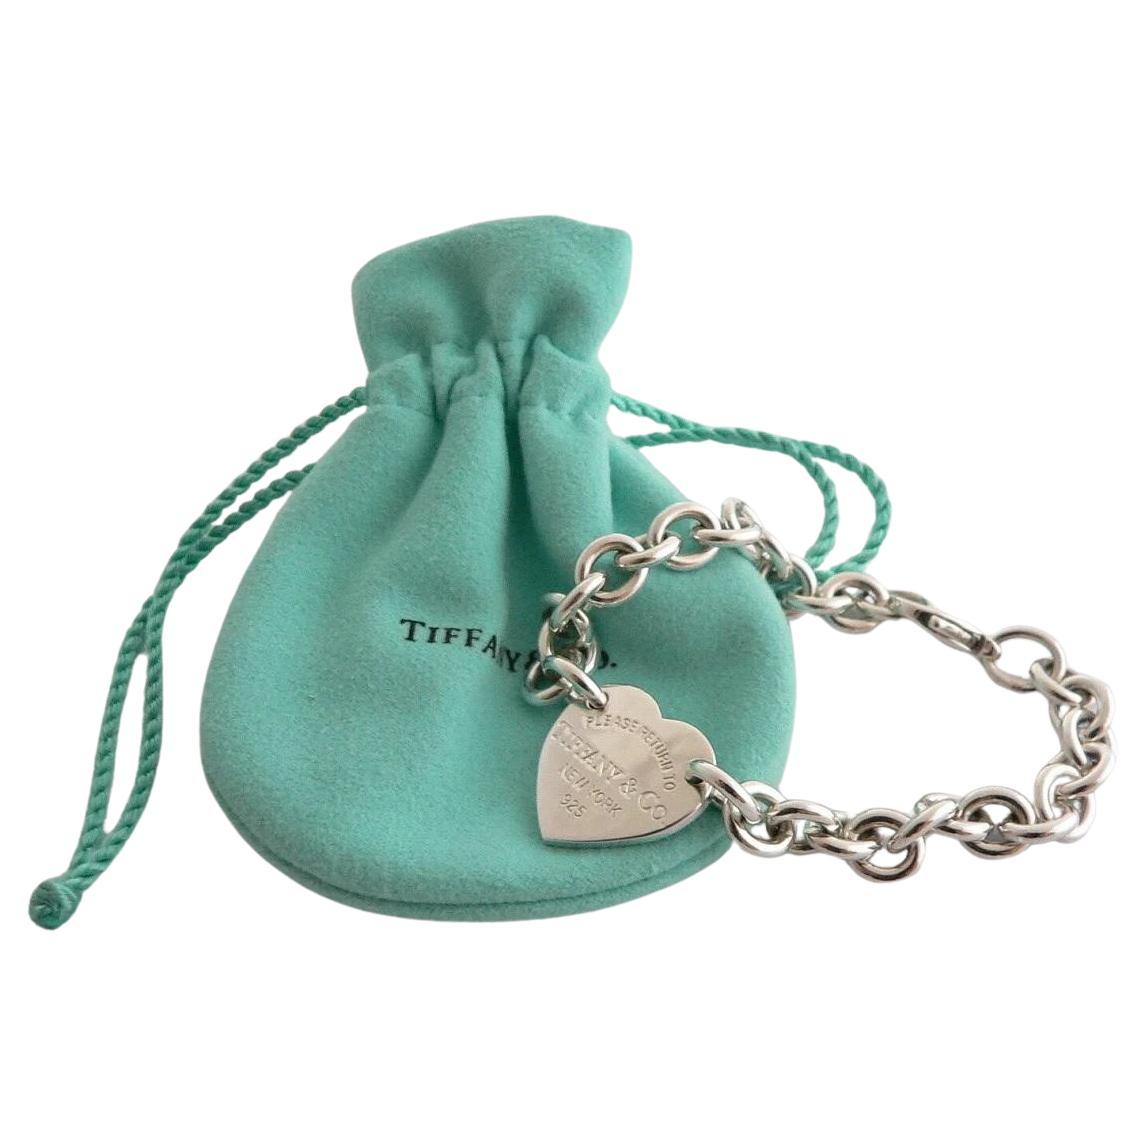 Return to Tiffany & co  Heart Tag Charm Bracelet in Silver